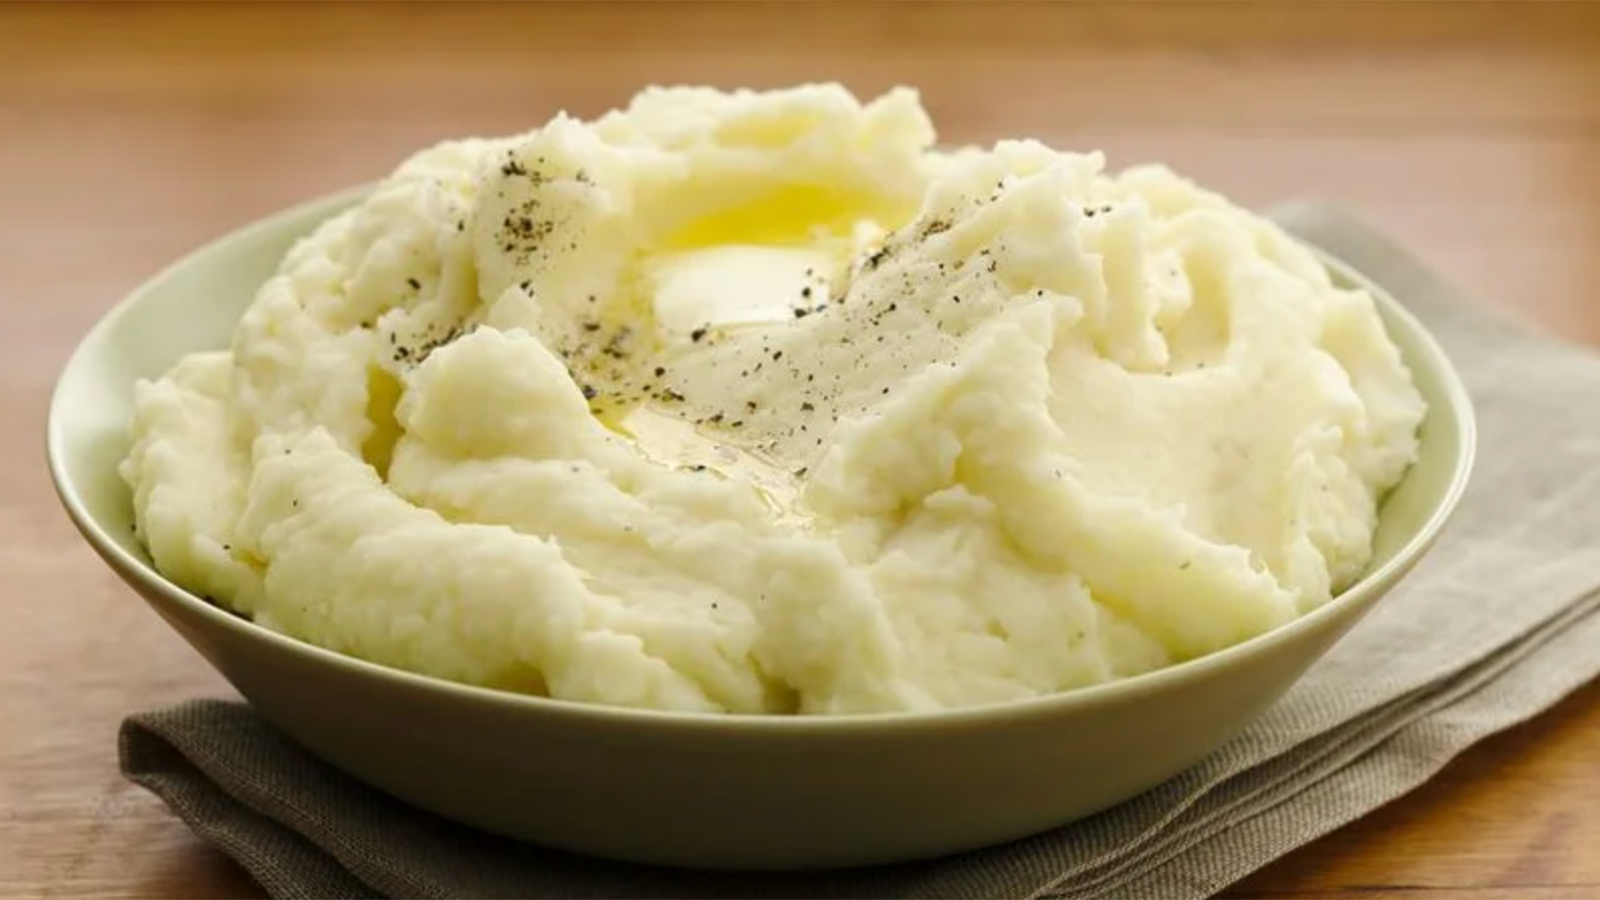 Frazie's Homemade Gourmet Mashed Potatoes